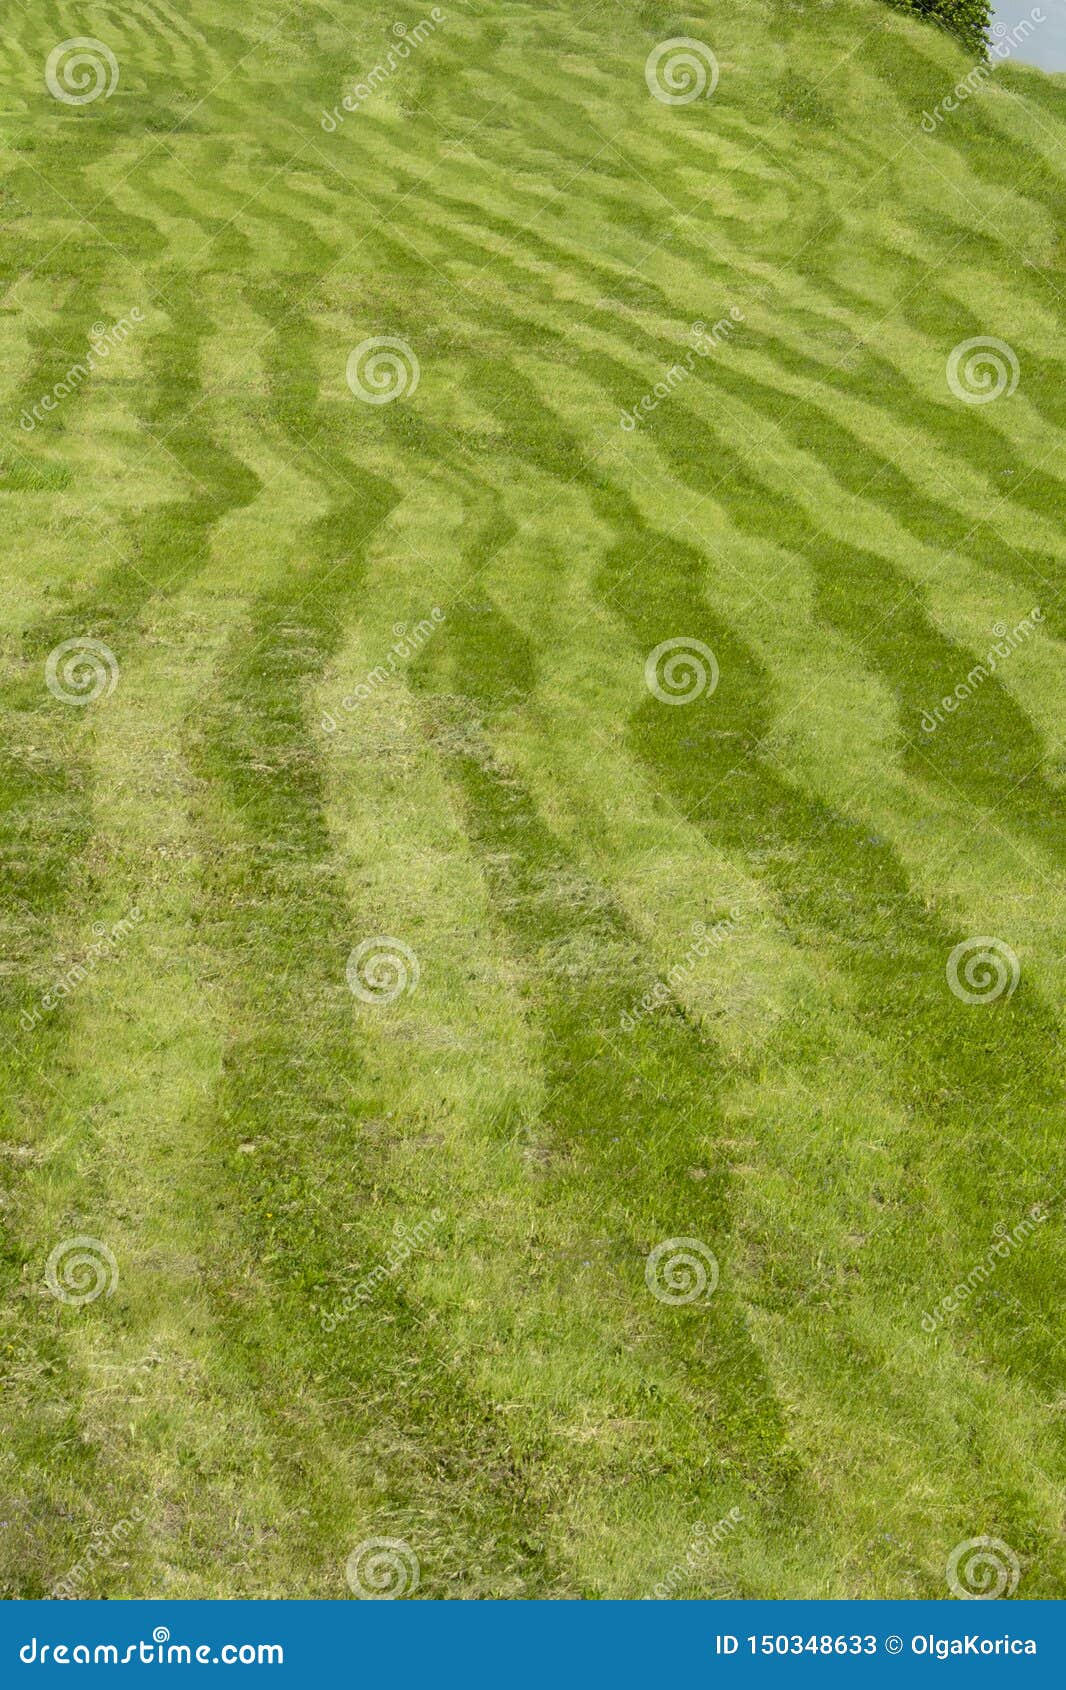 Striped Field, Grass Mowed by Uneven Stripes of Different Shades of